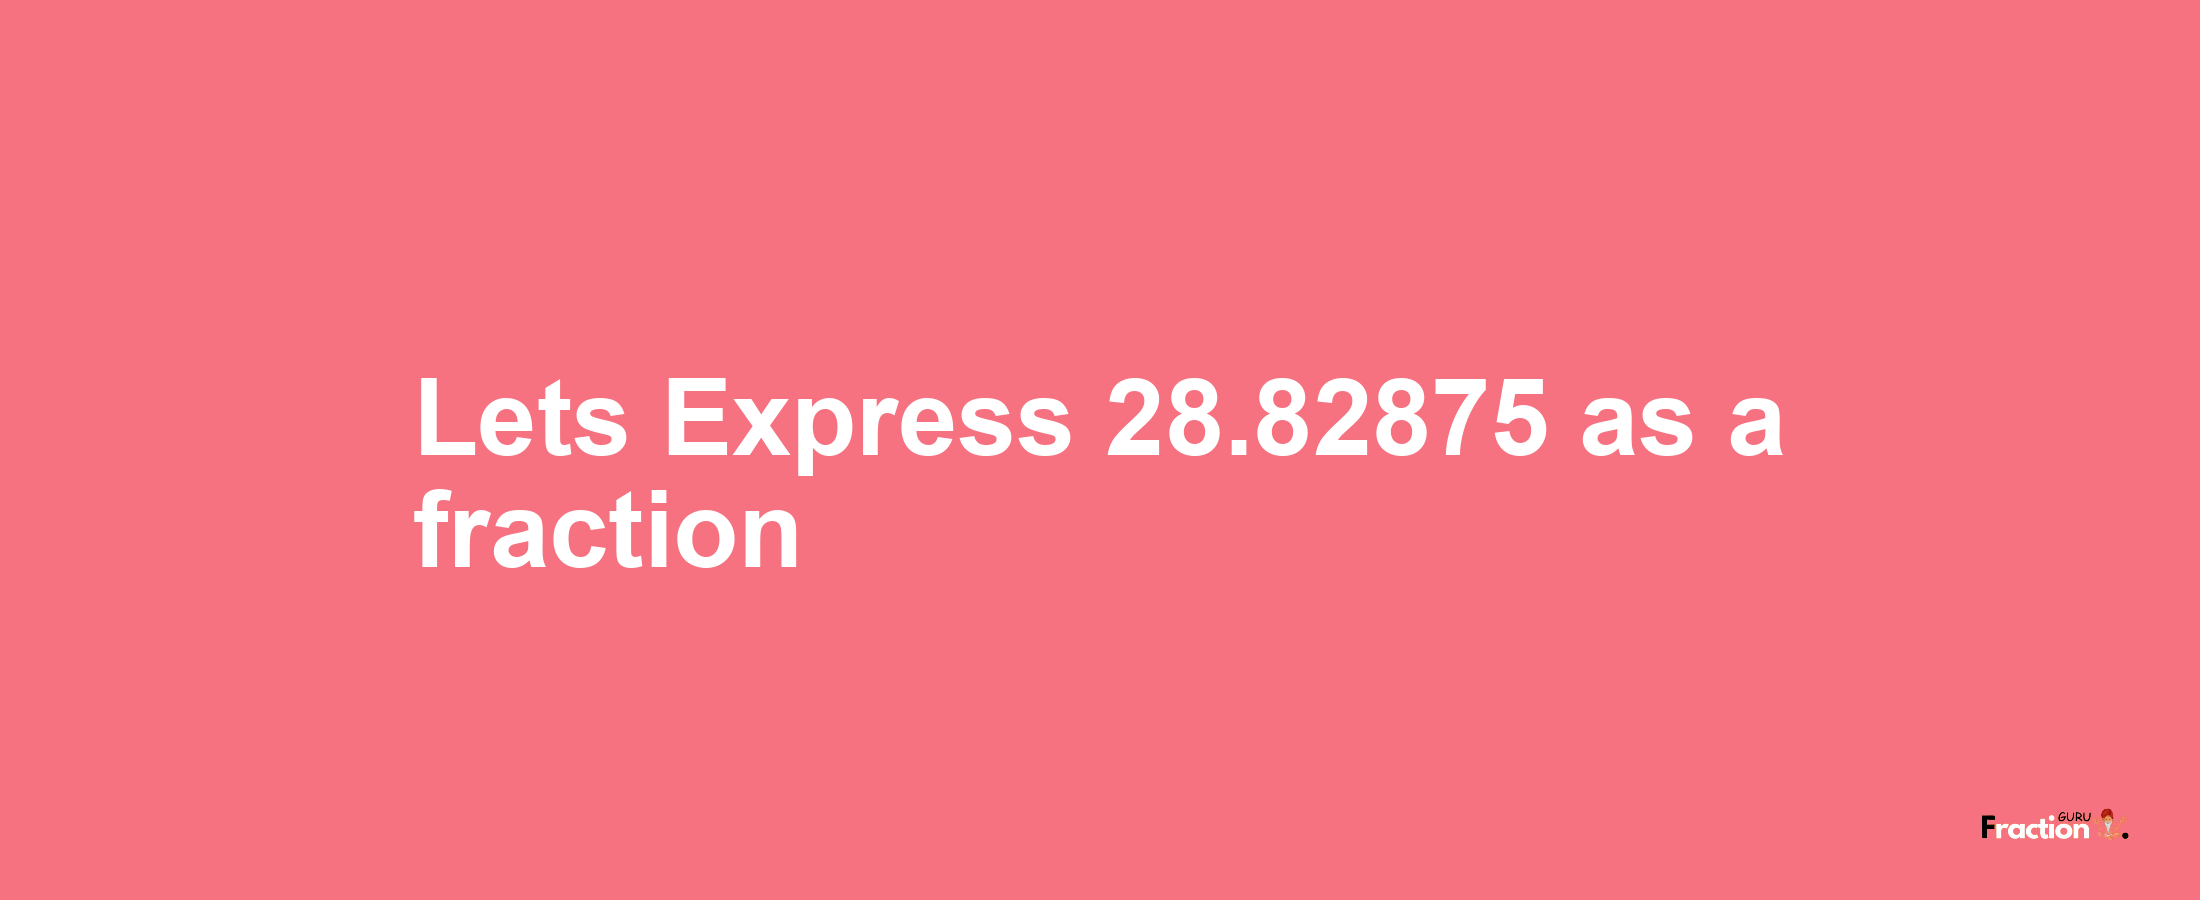 Lets Express 28.82875 as afraction